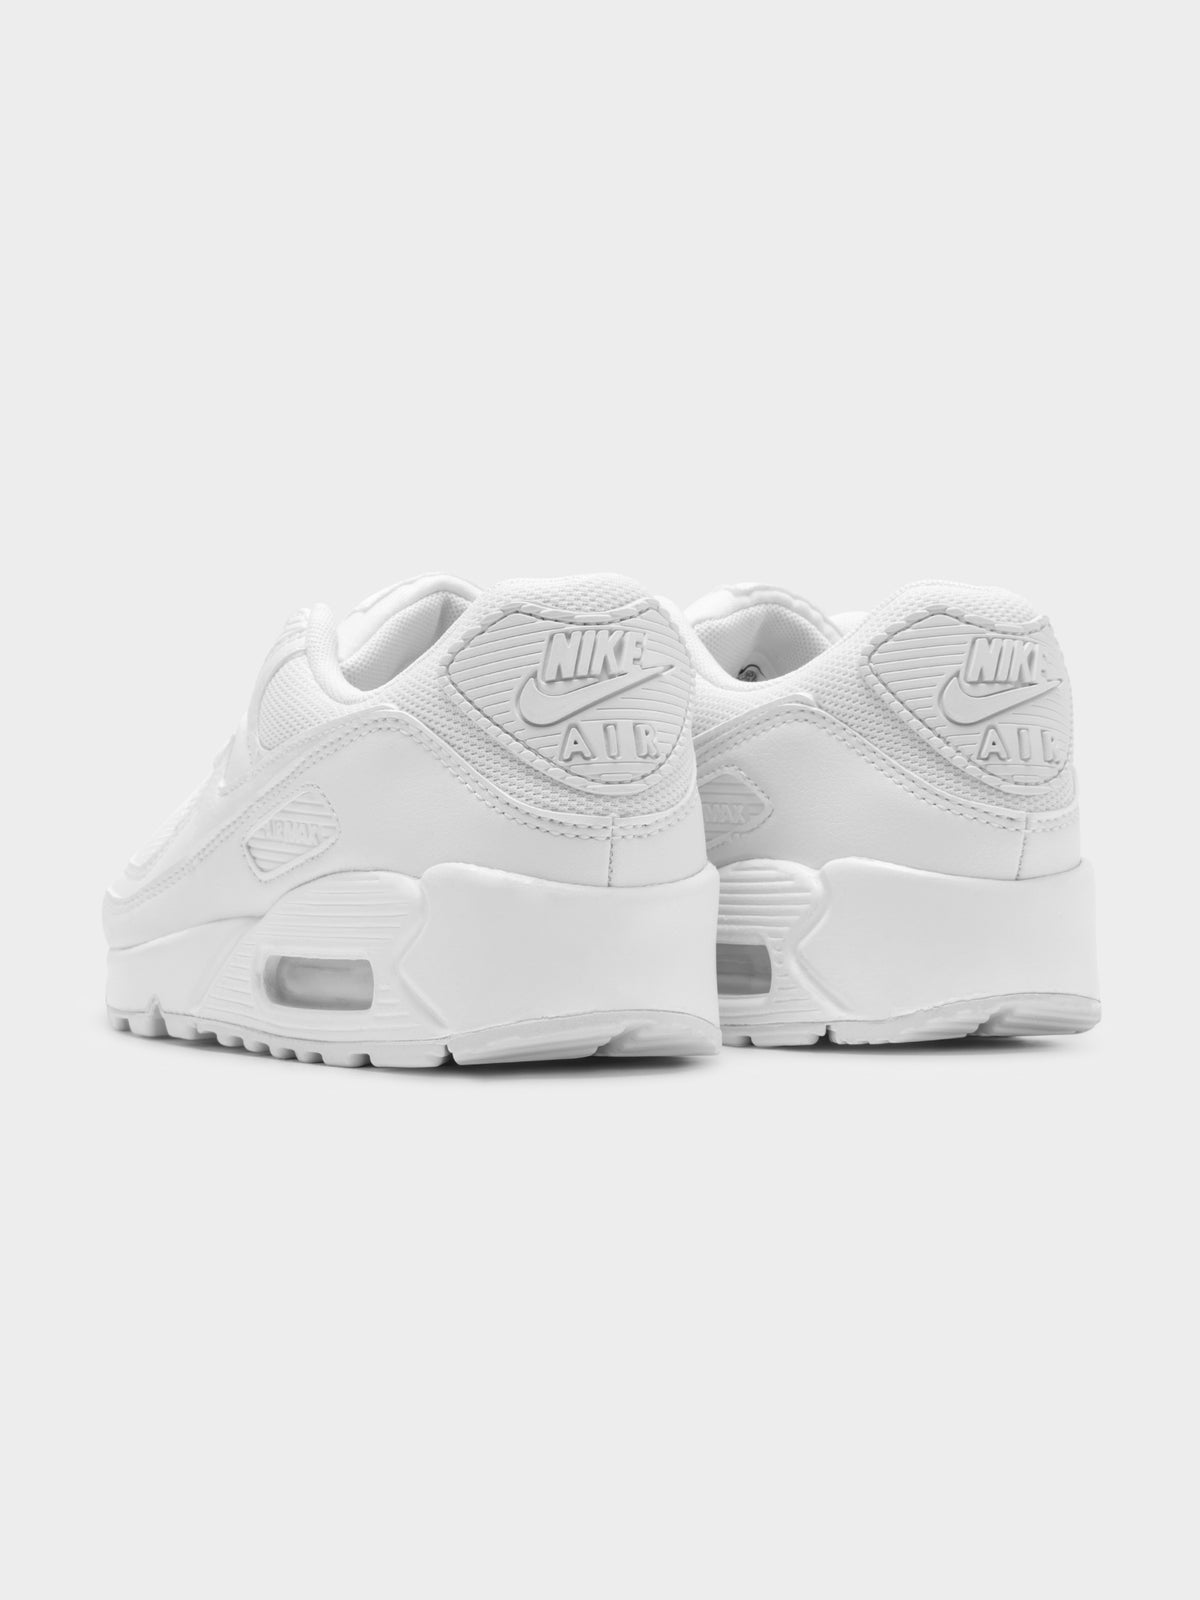 Womens Air Max 90 Sneakers in White